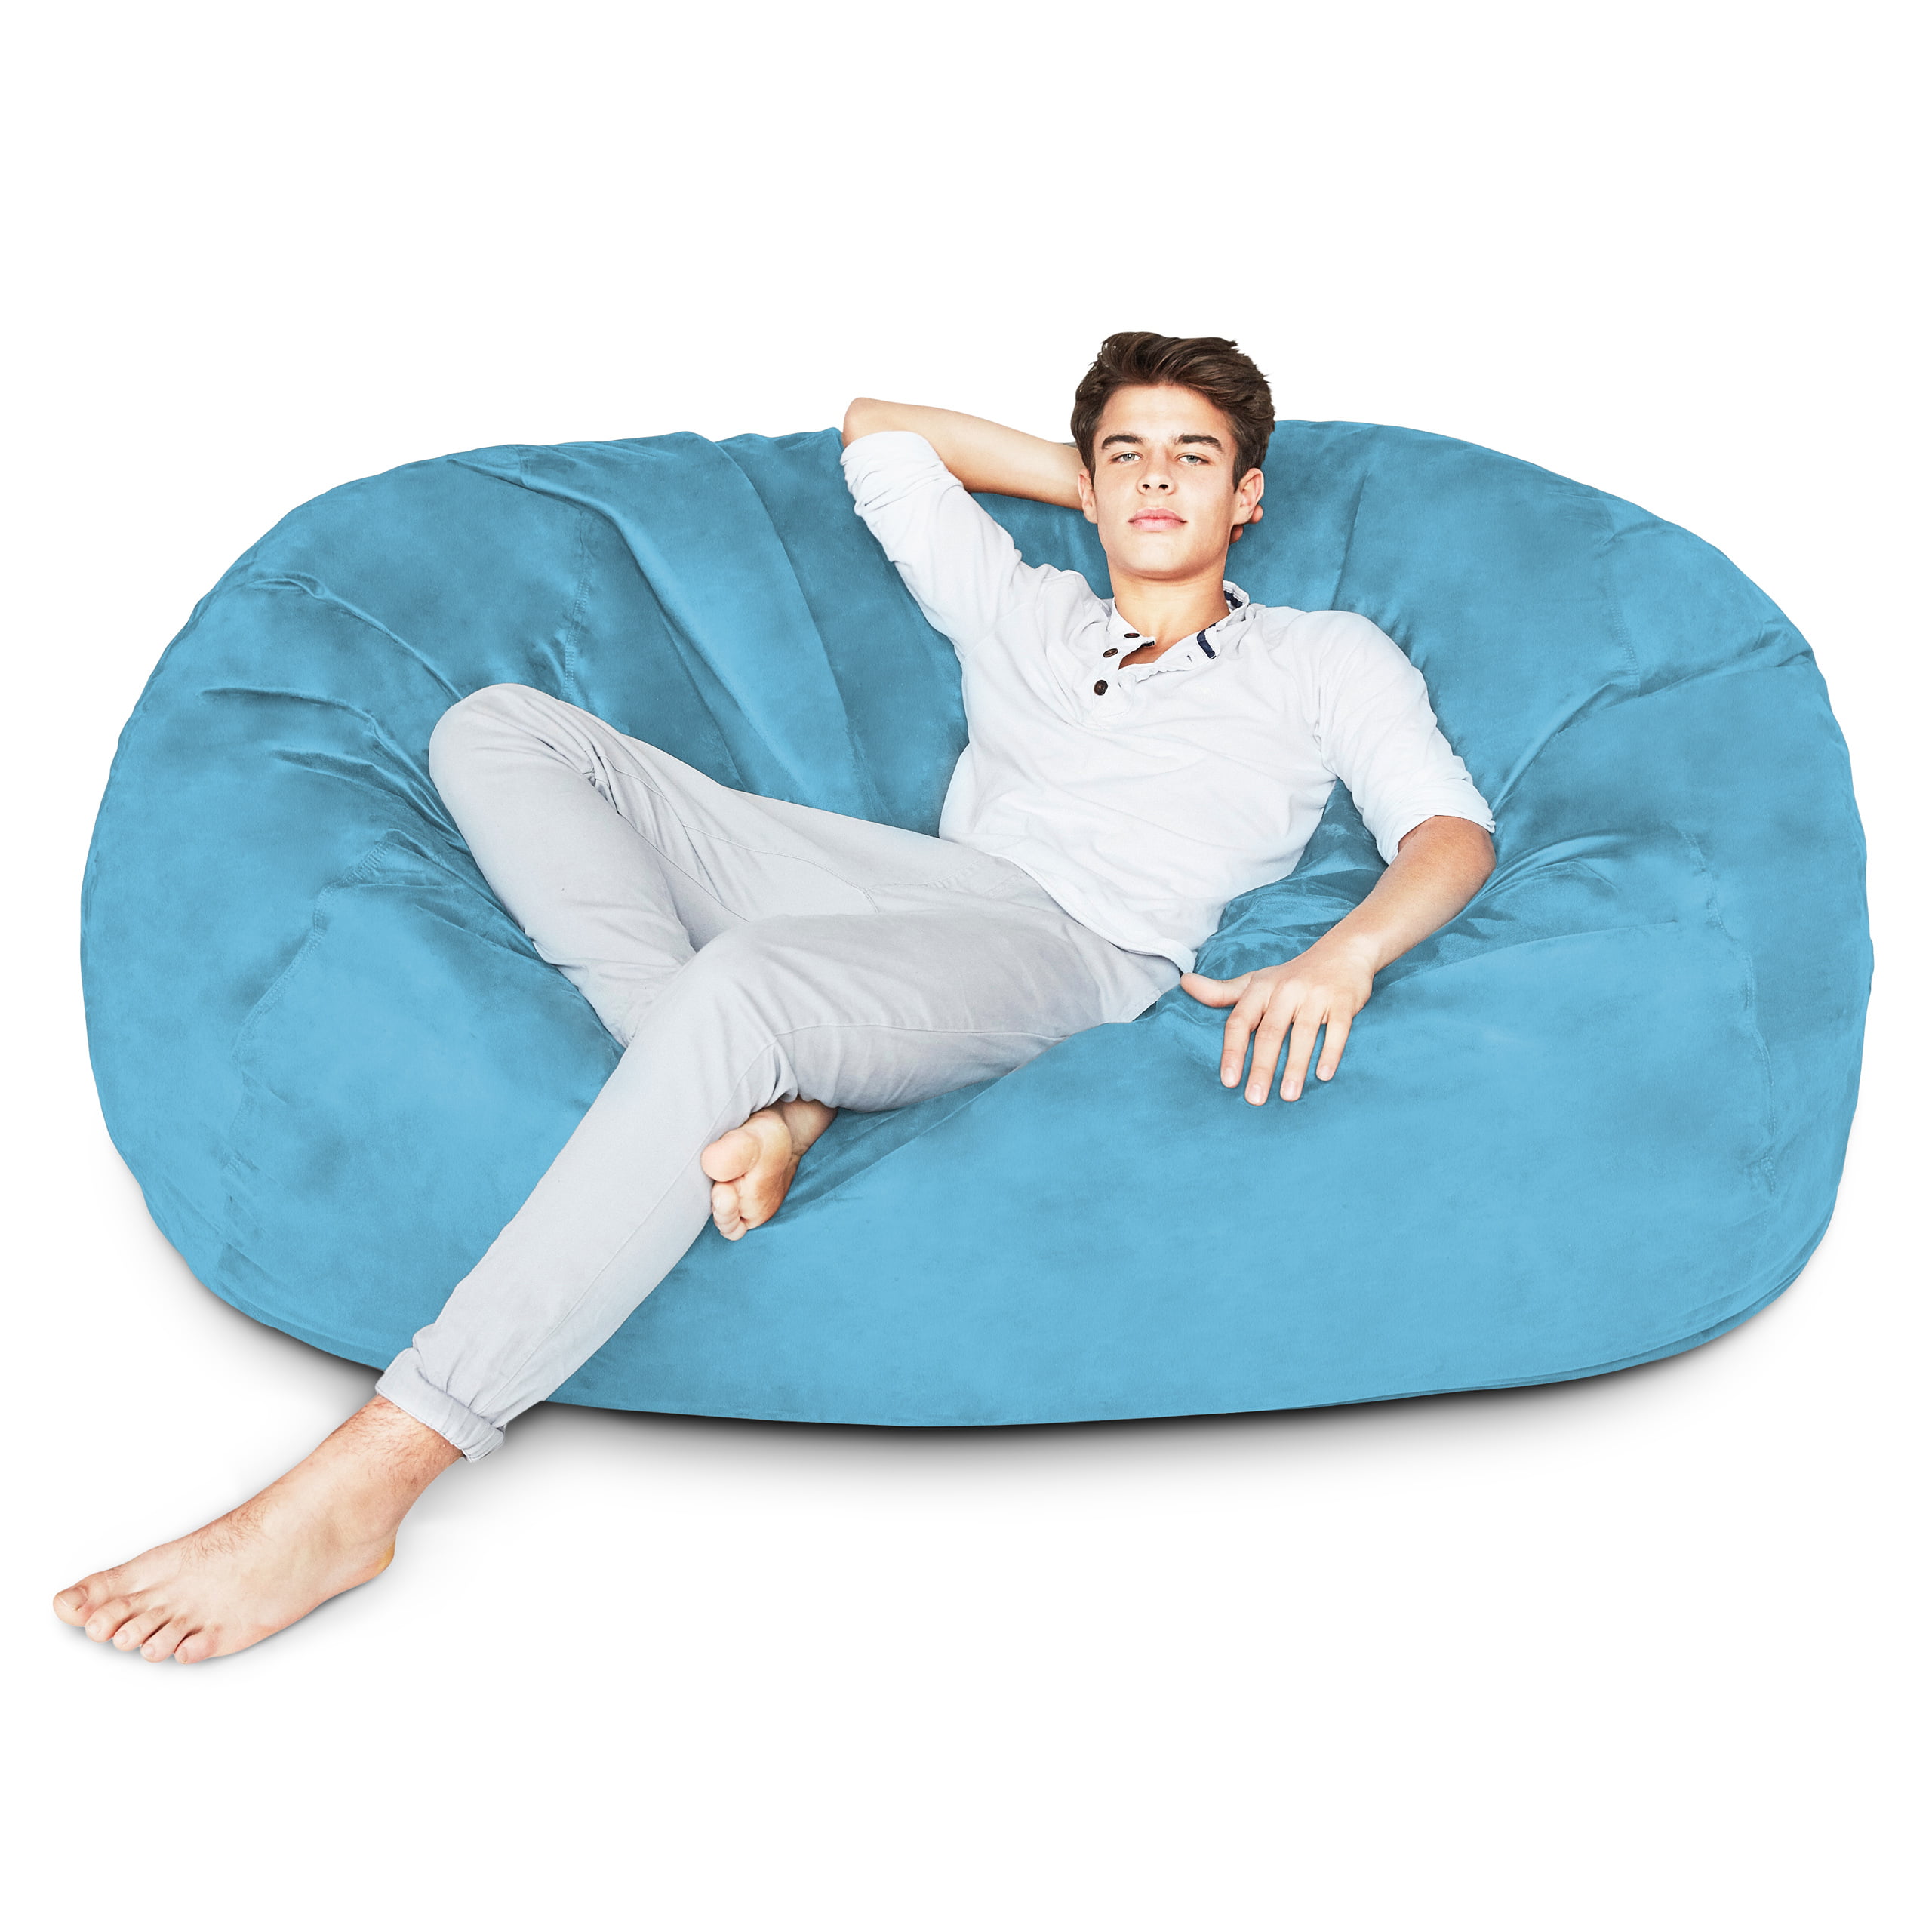 Lumaland Luxury 6-Foot Bean Bag Chair with Microsuede ...